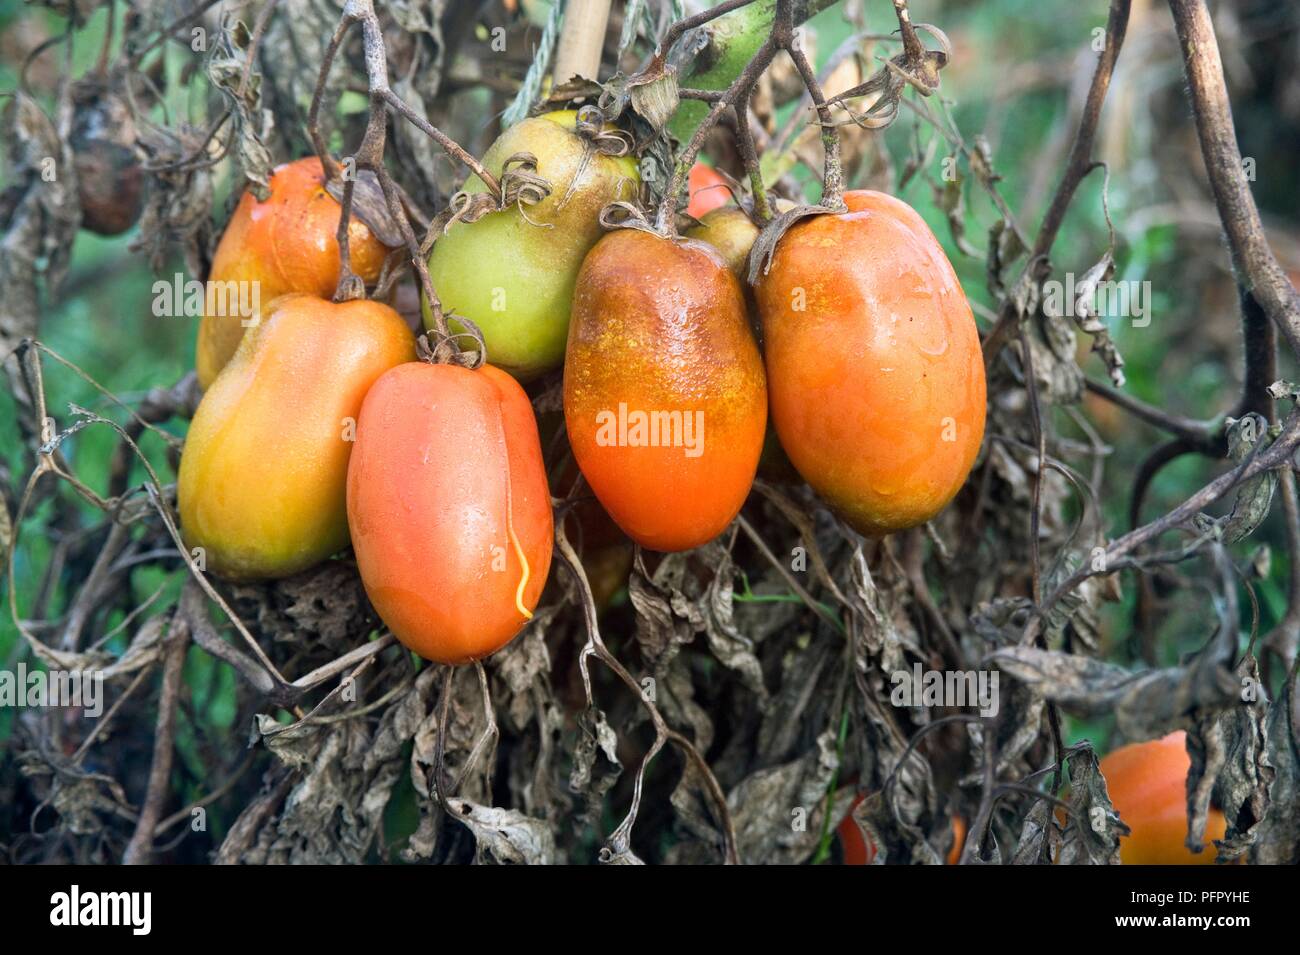 Tomatoes infected with tomato blight, close-up Stock Photo